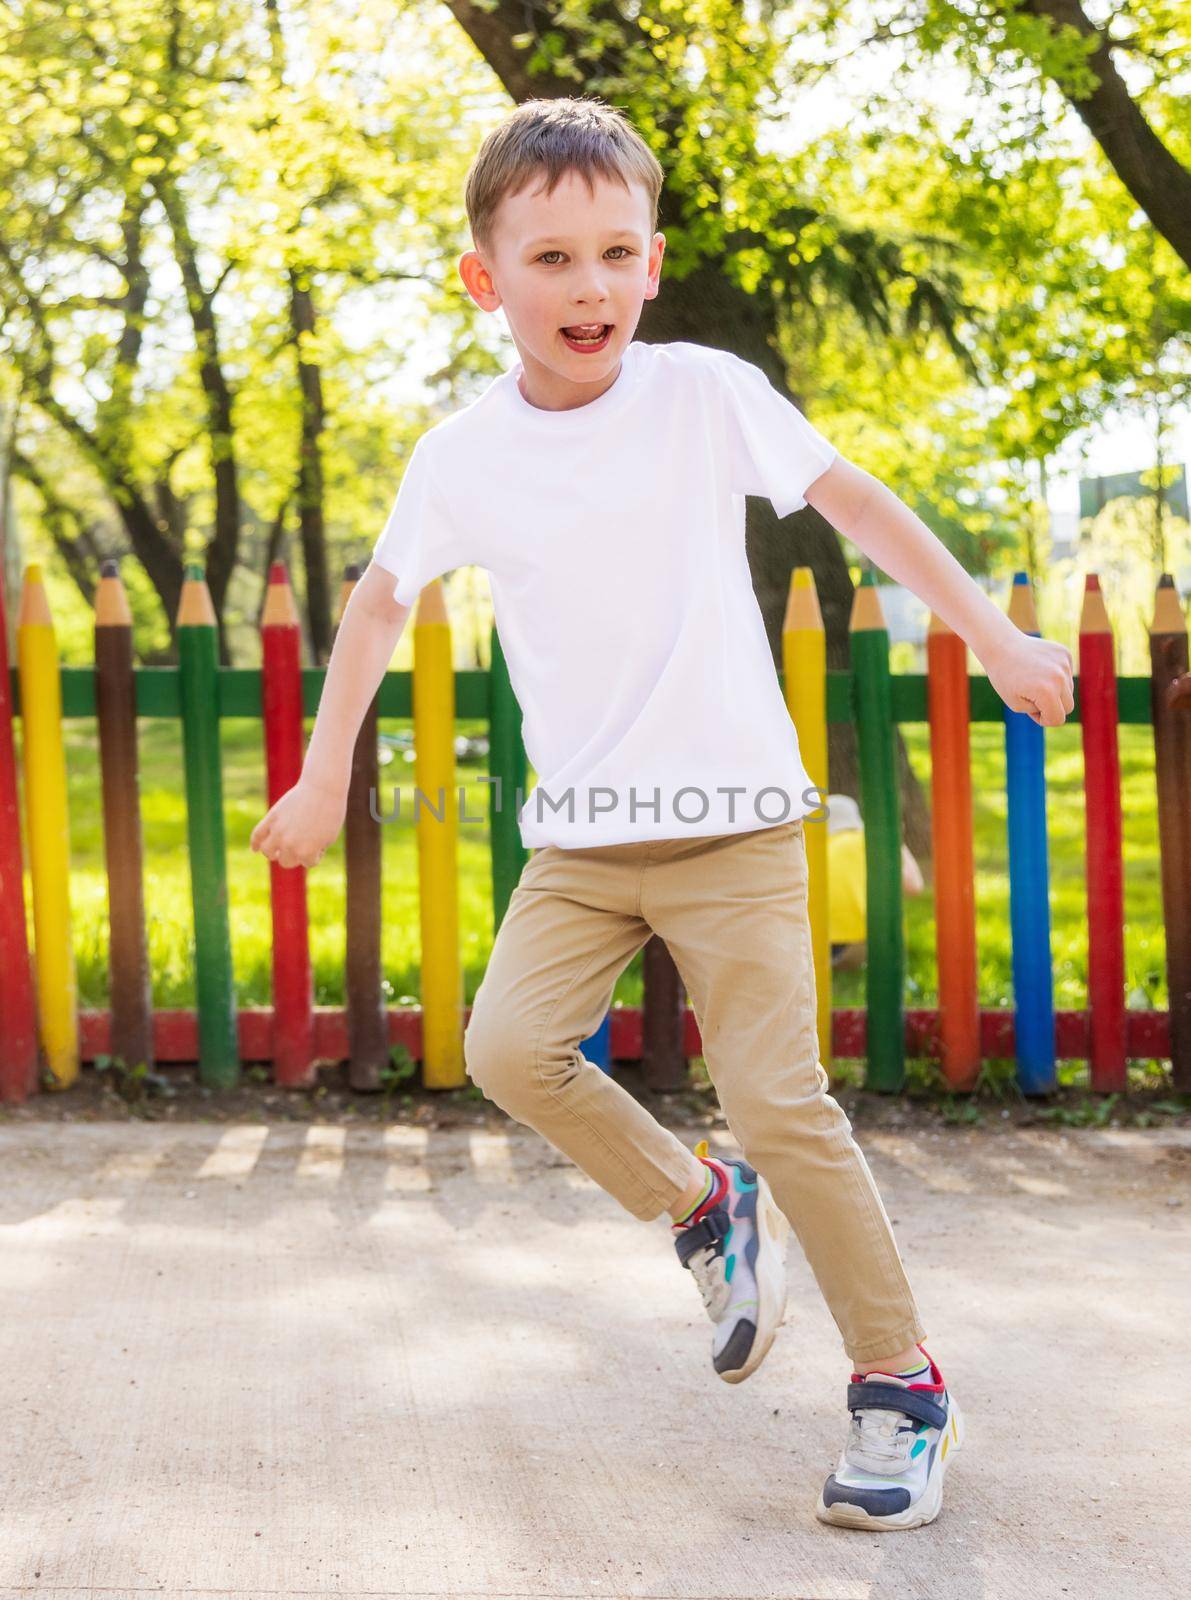 Mockup, template for children's clothing, sportswear, uniforms. A small, cheerful boy laughs and dances in the park. The child is wearing a white T-shirt with an empty space for design